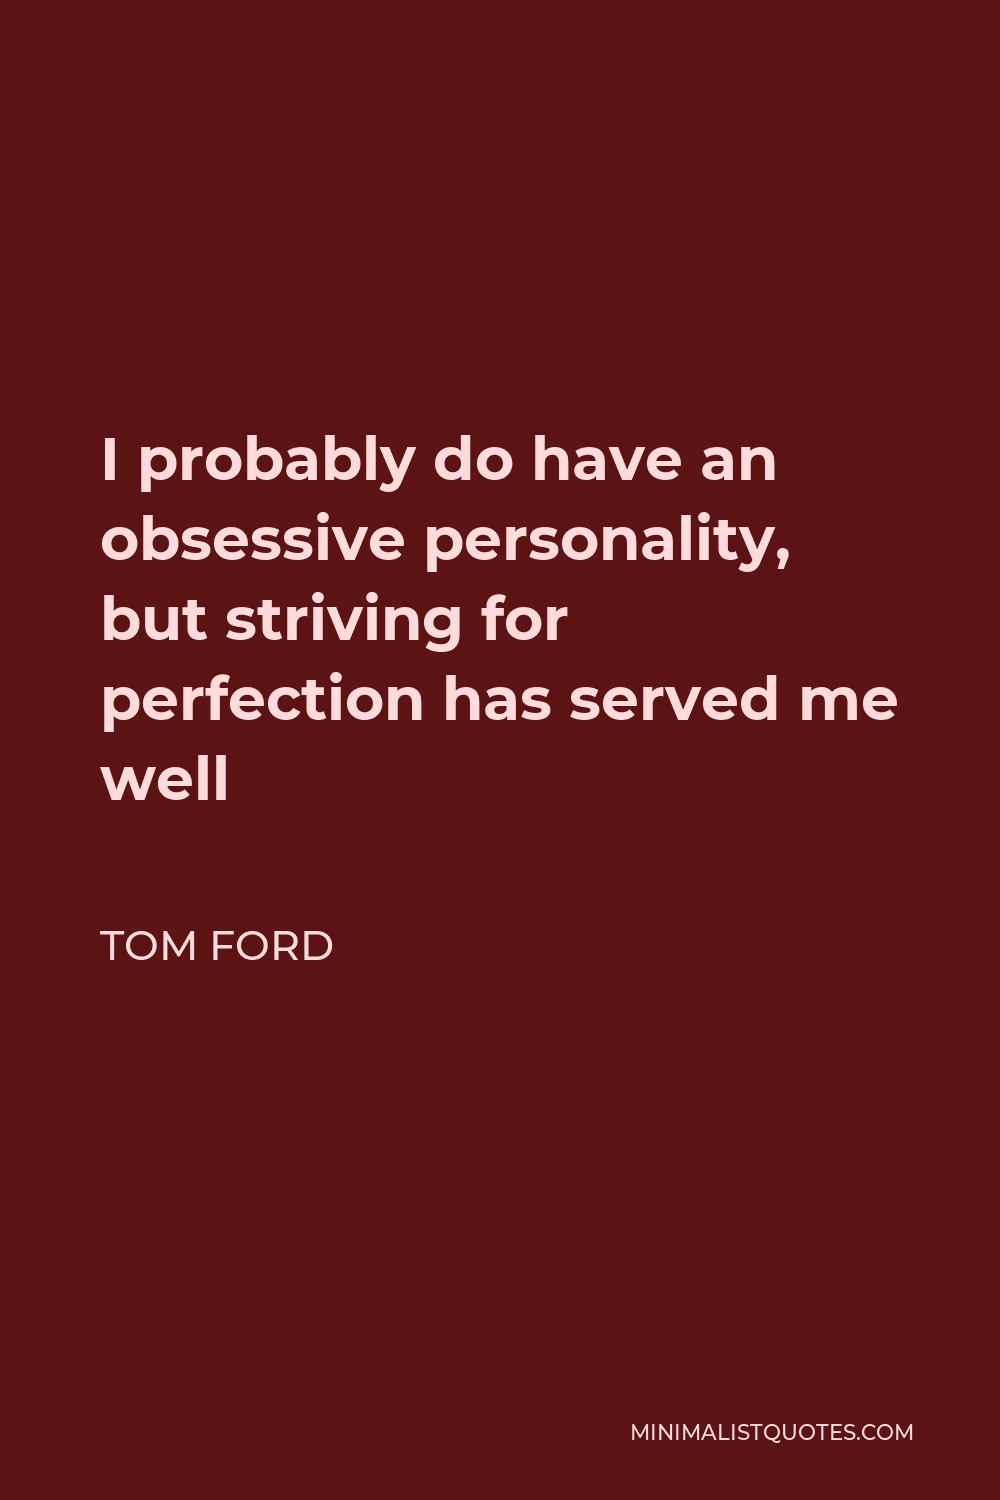 Tom Ford Quote: I probably do have an obsessive personality, but striving  for perfection has served me well